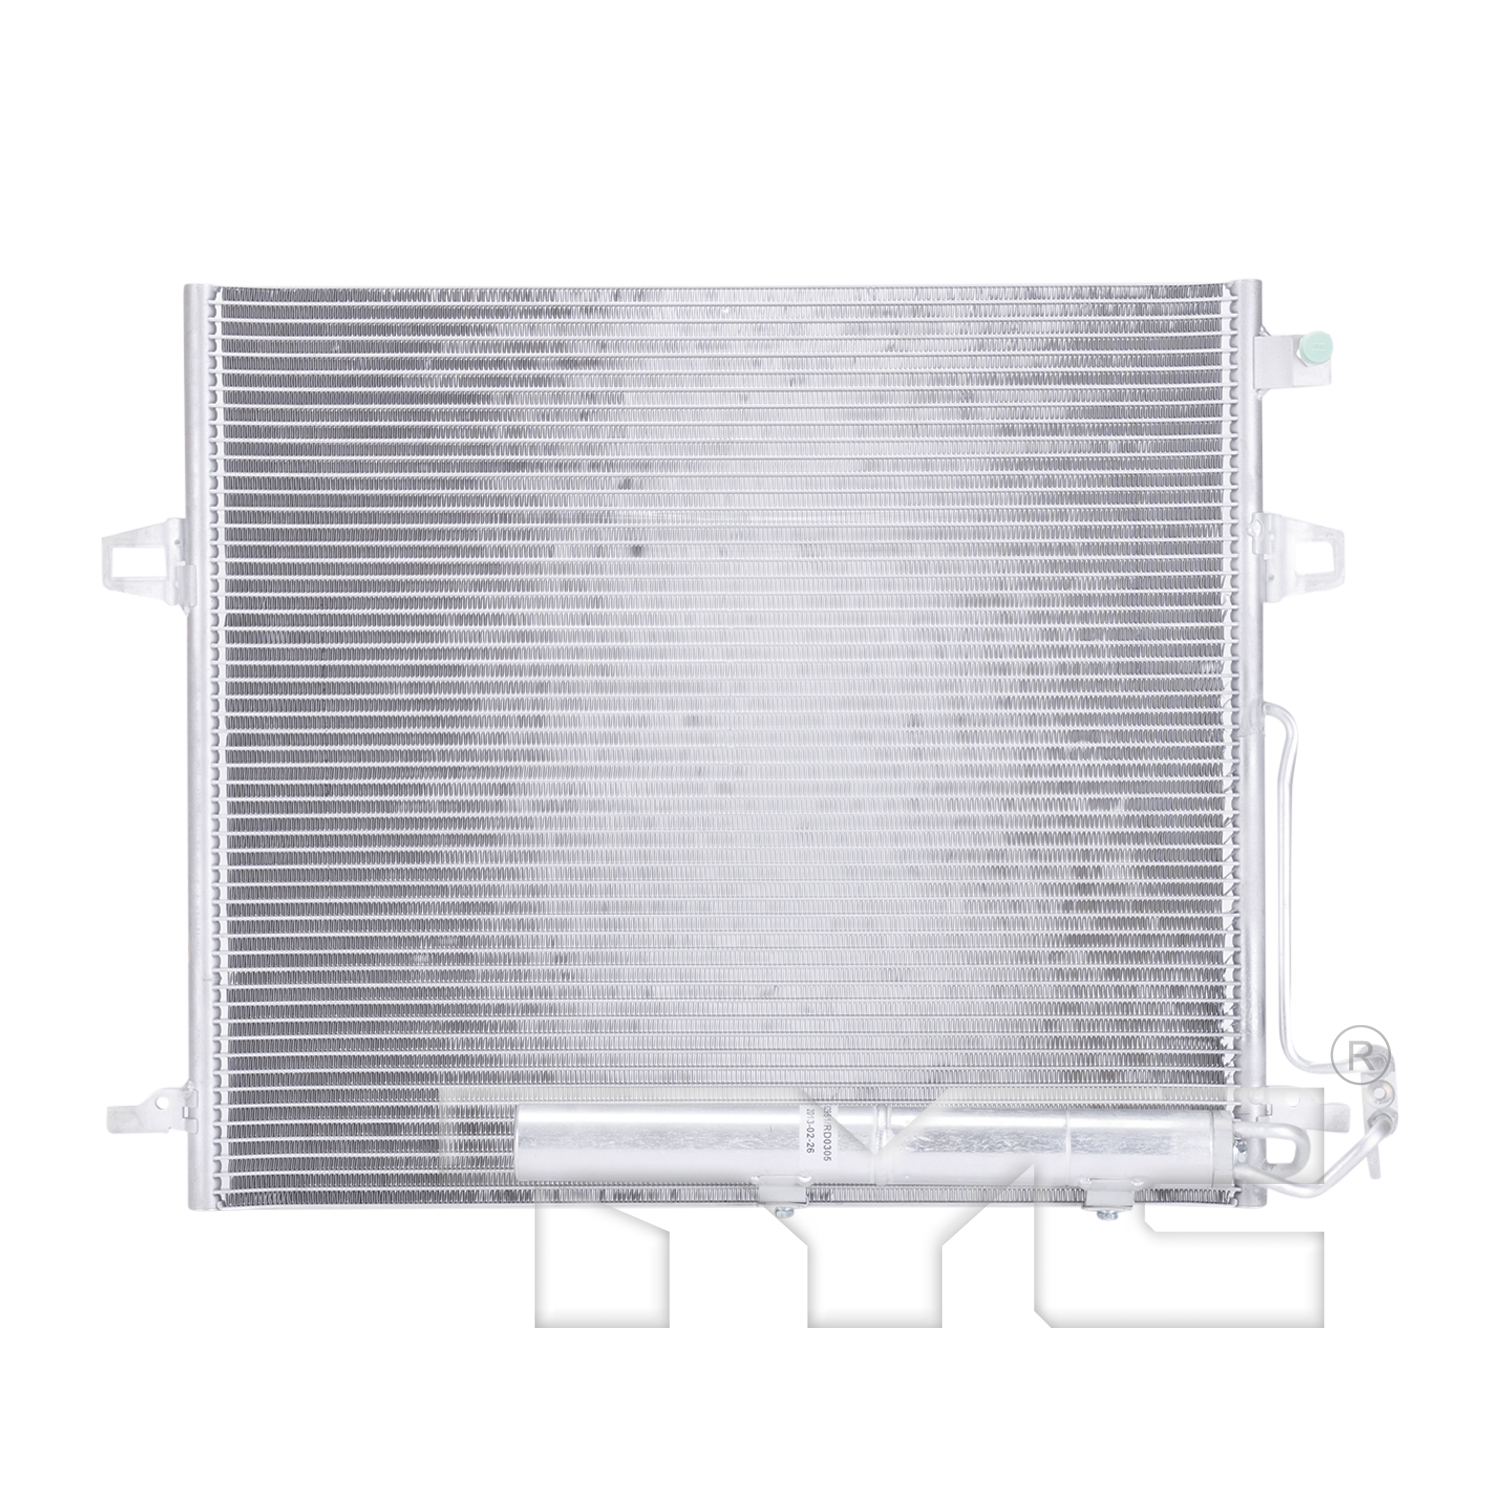 Aftermarket AC CONDENSERS for MERCEDES-BENZ - R320, R320,07-09,Air conditioning condenser